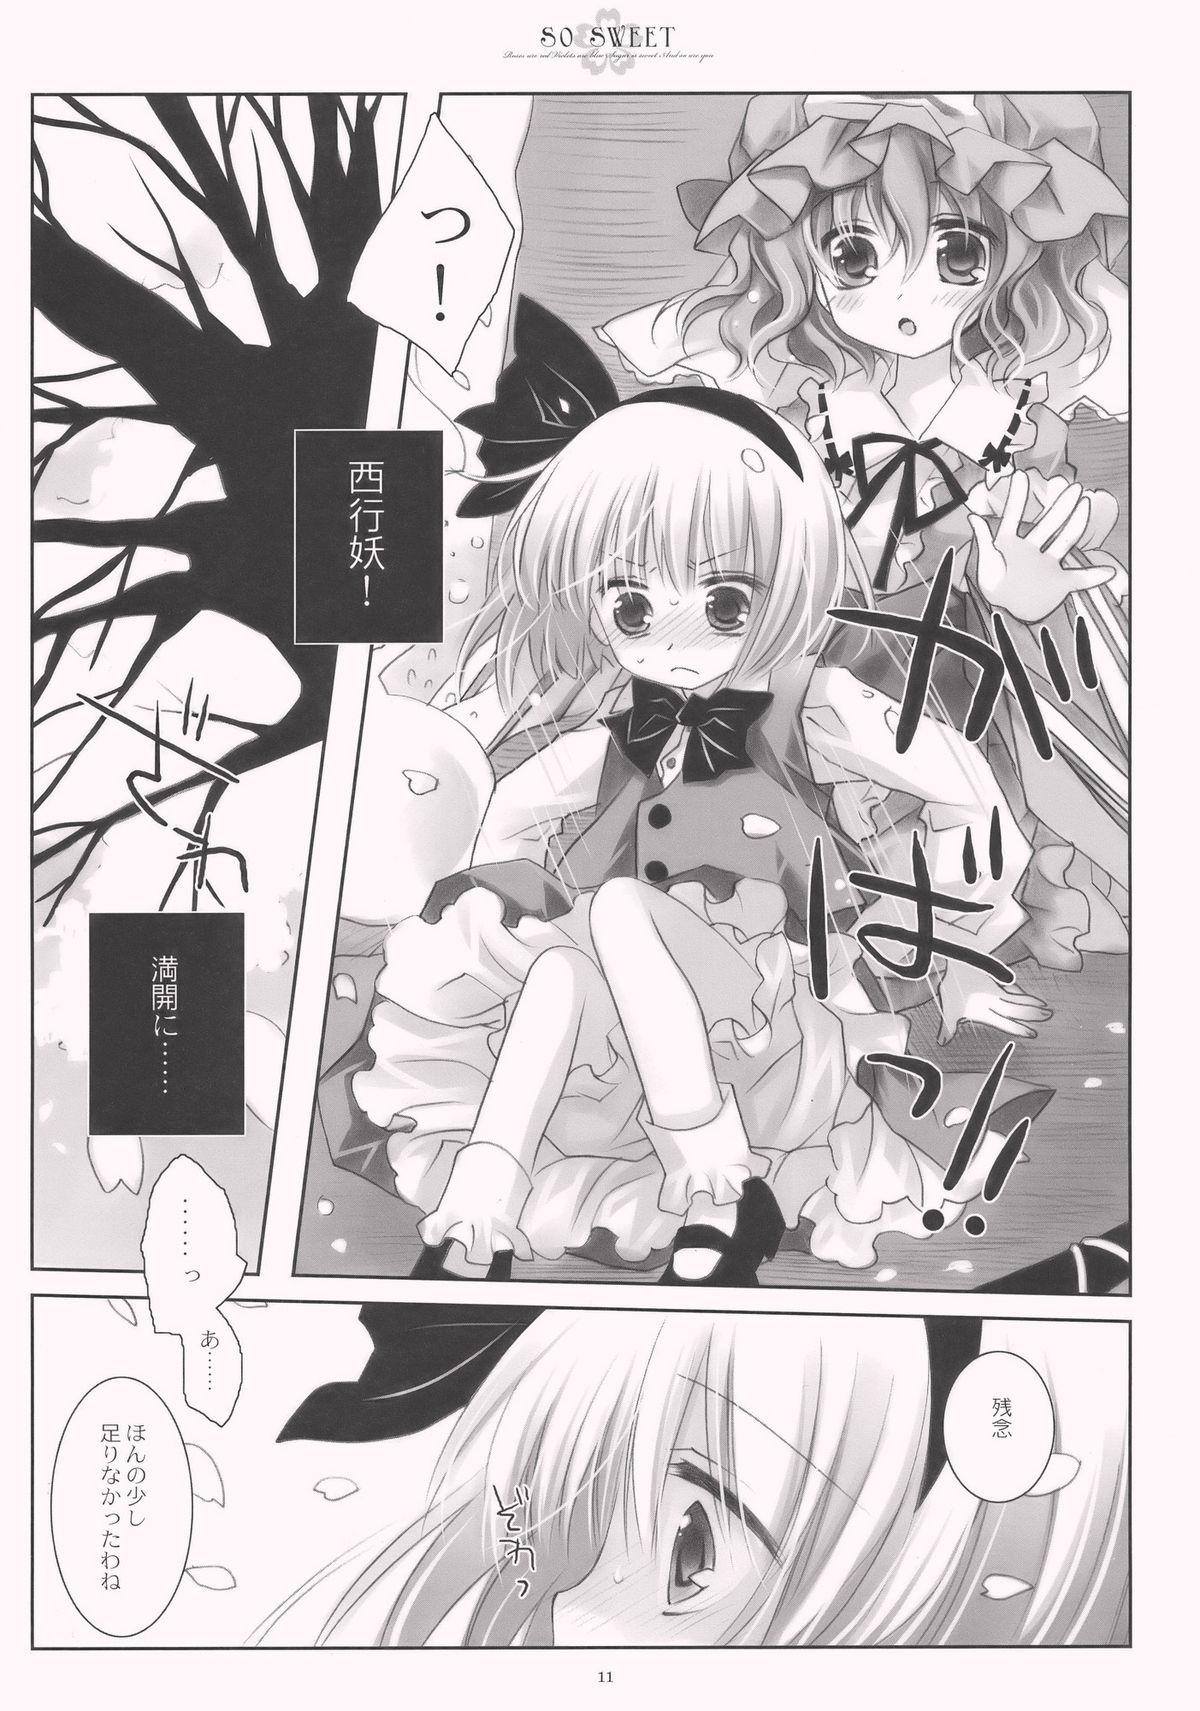 Hot SO SWEET - Touhou project Rebolando - Page 11